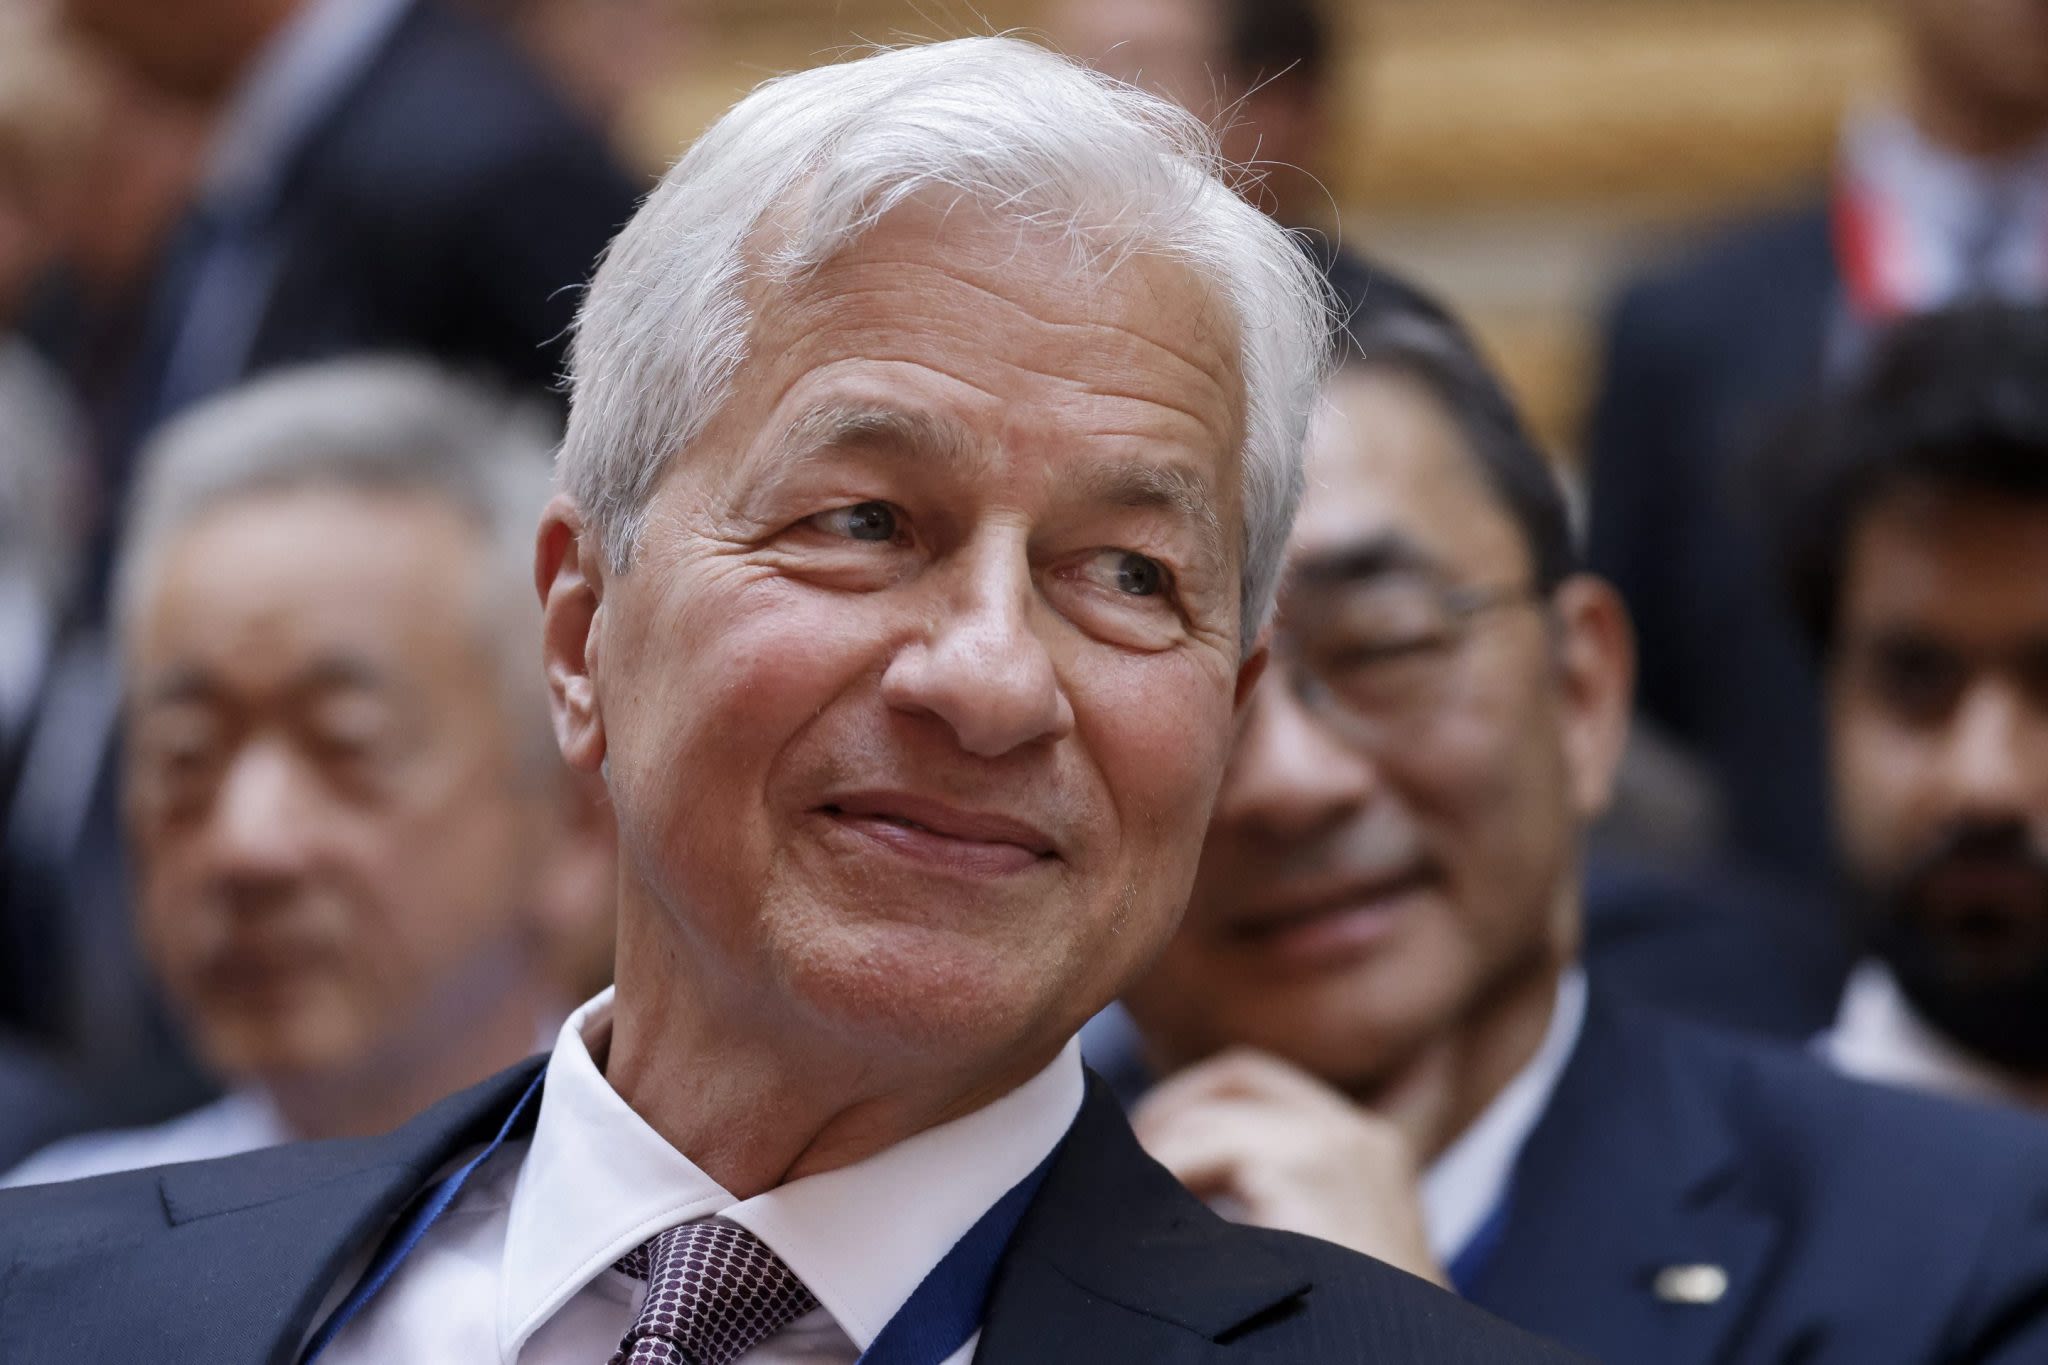 JPMorgan boss Jamie Dimon reportedly up for a knighthood in the U.K. as part of Rishi Sunak’s honors nominations